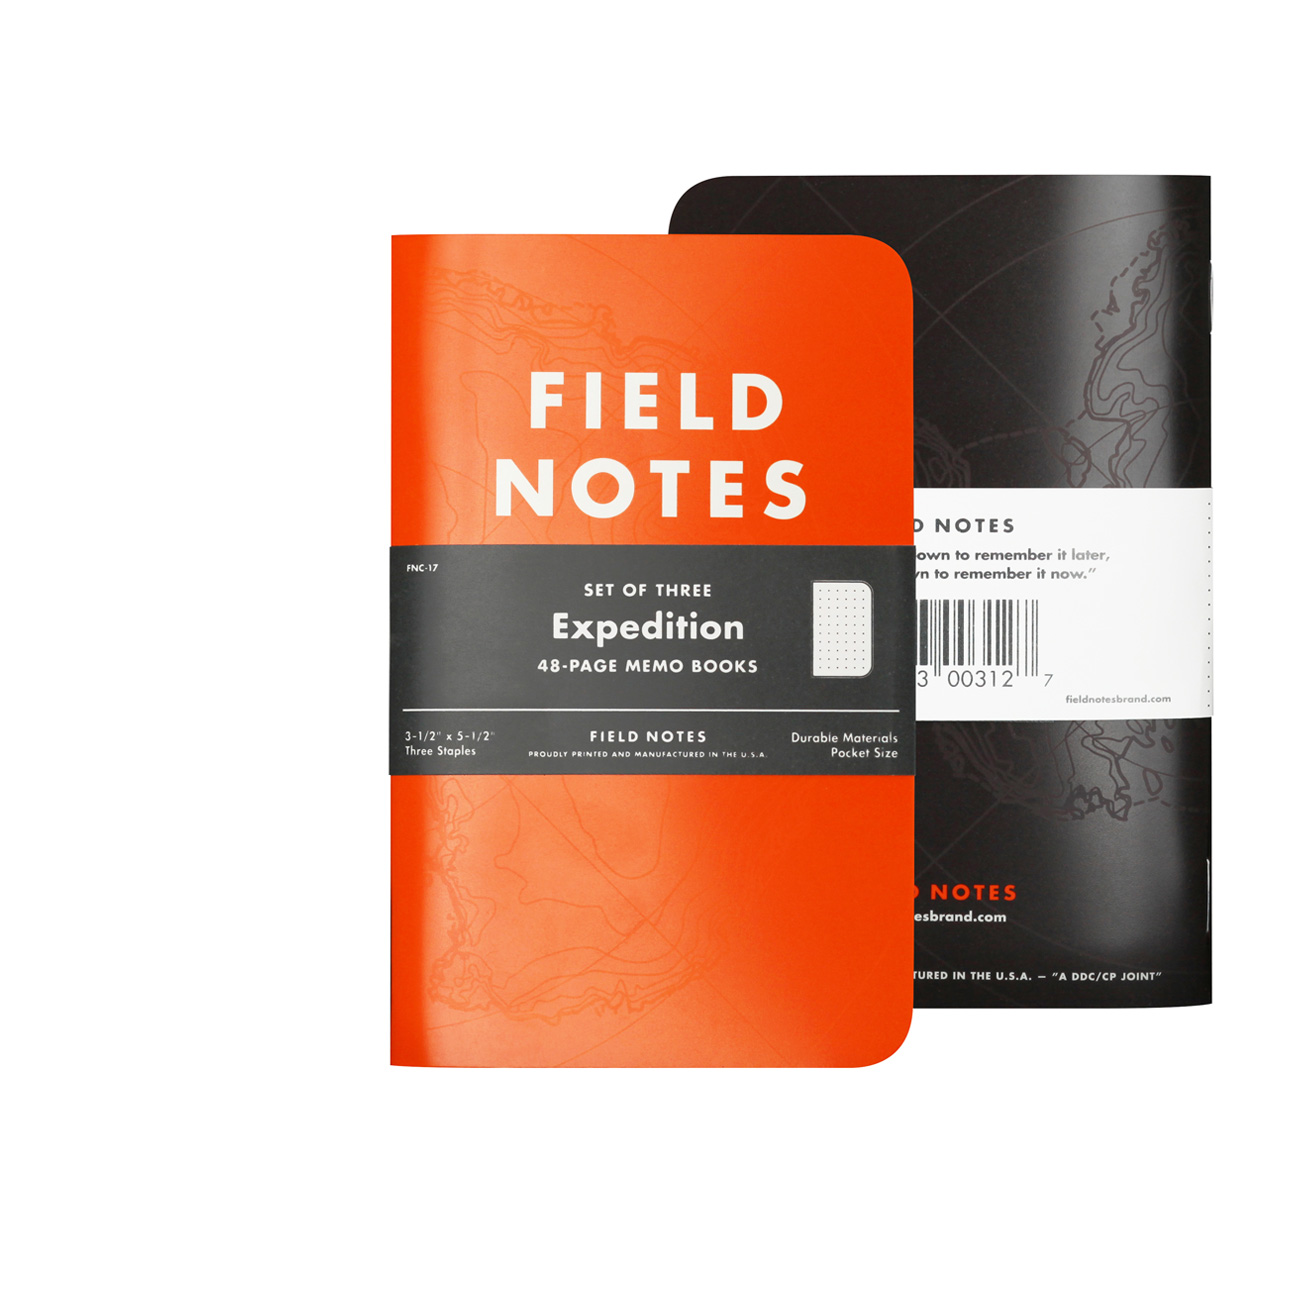 FIELD NOTES – EXPEDITION Edition